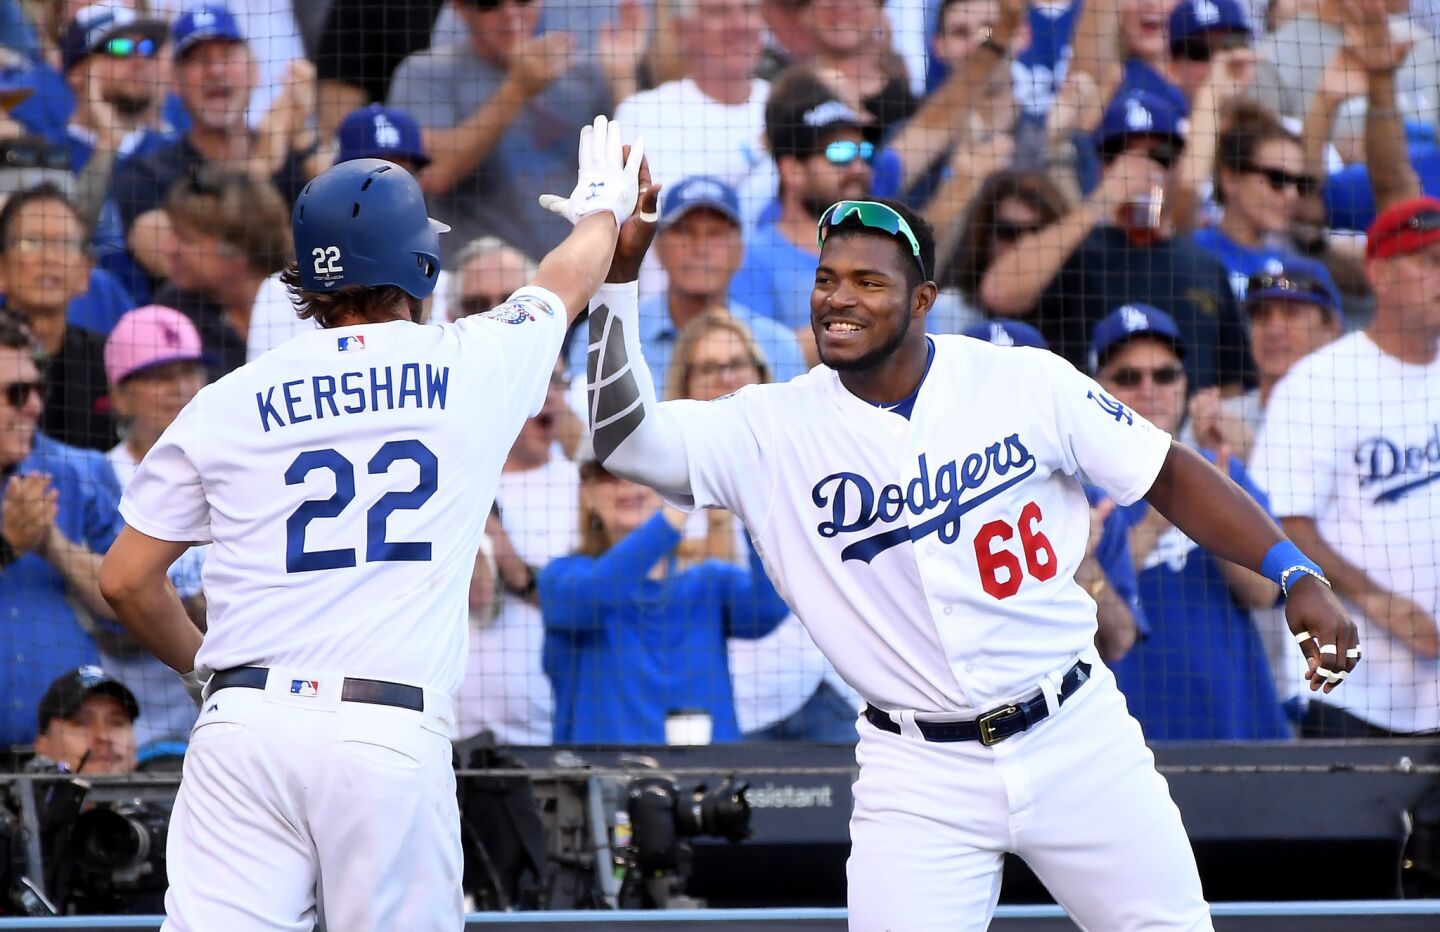 Dodgers pitcher Clayton Kershaw is congratulated by Yasiel Puig after scoring a run.